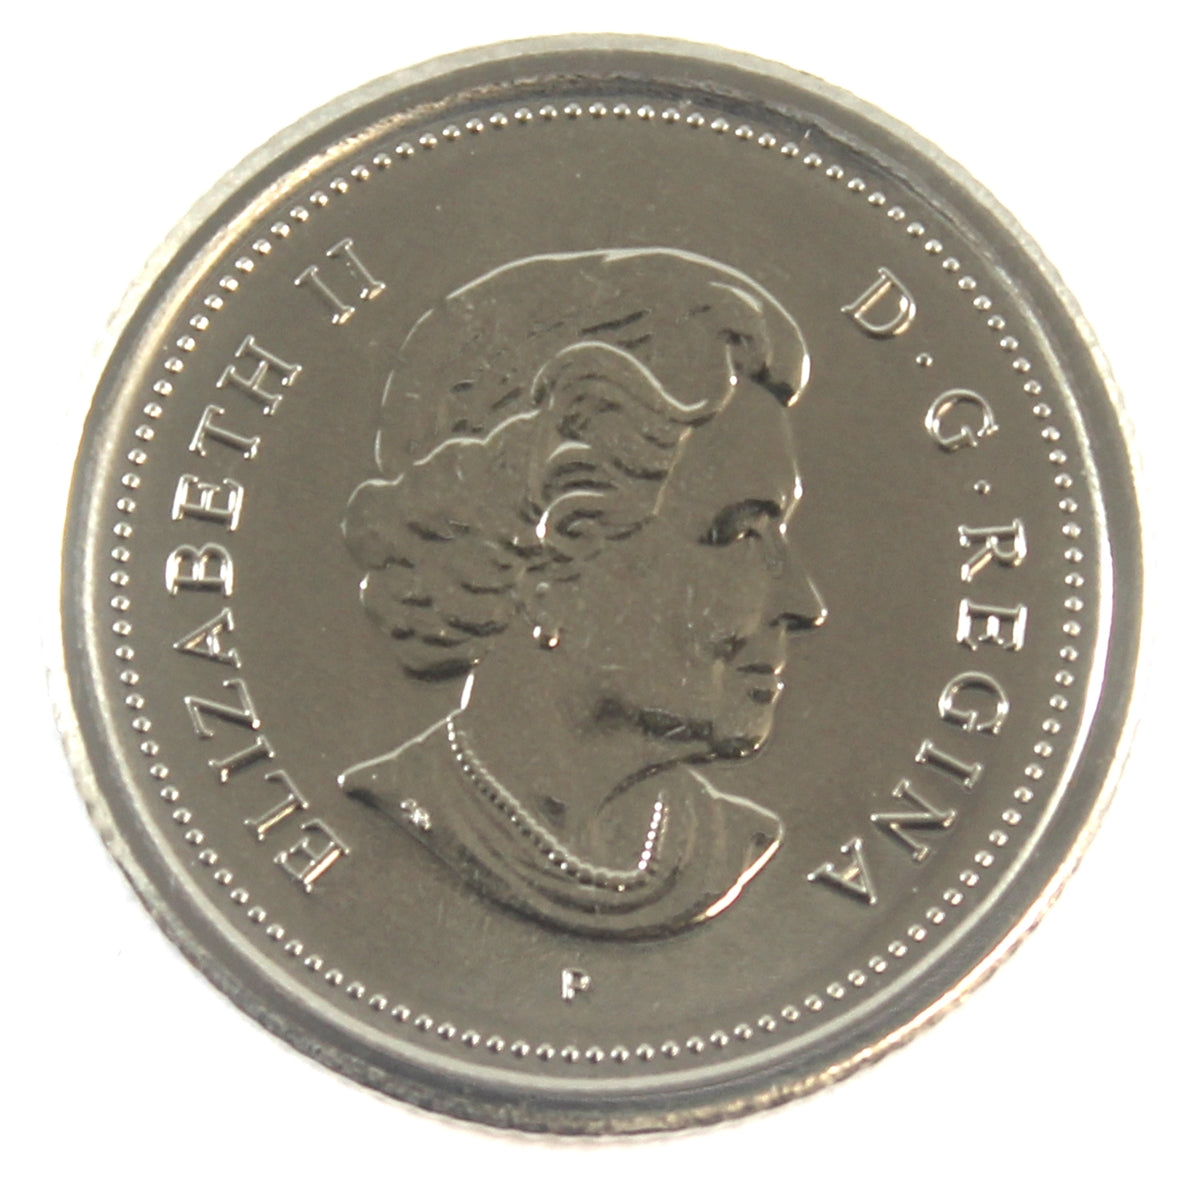 2004P Canada 10-cent Proof Like